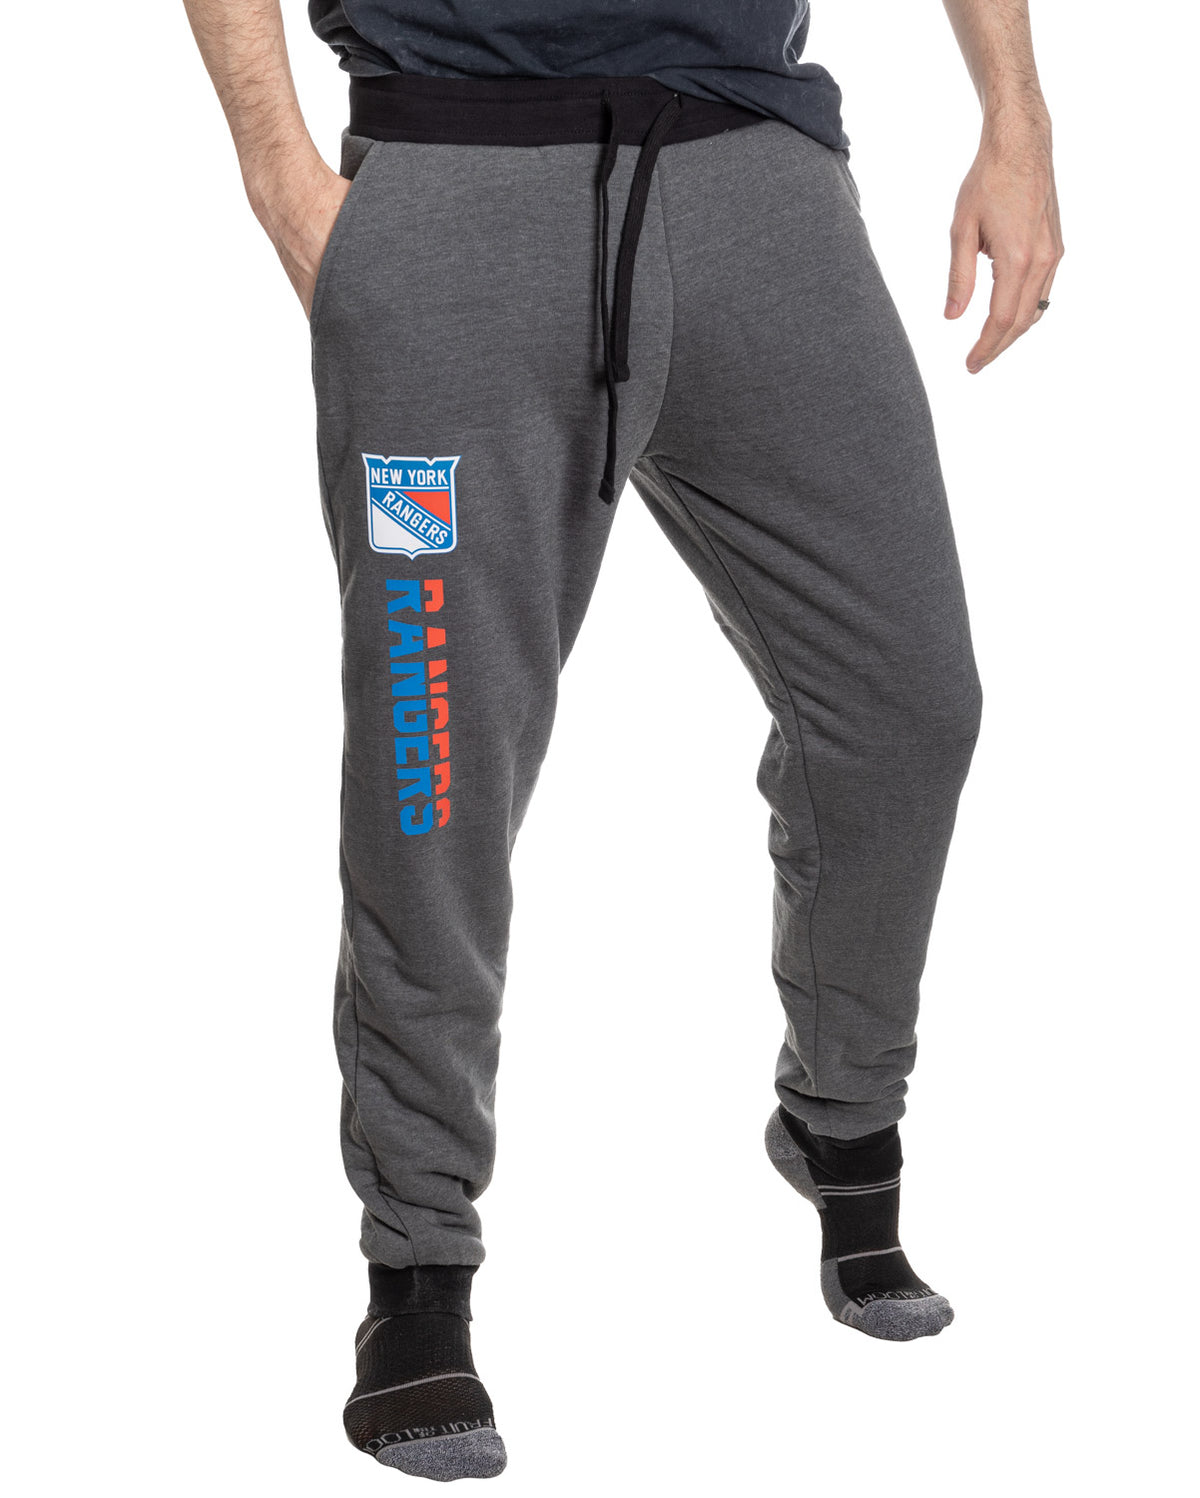 New York Rangers NHL Unisex Sherpa Lined Warm Sweatpants with Pockets